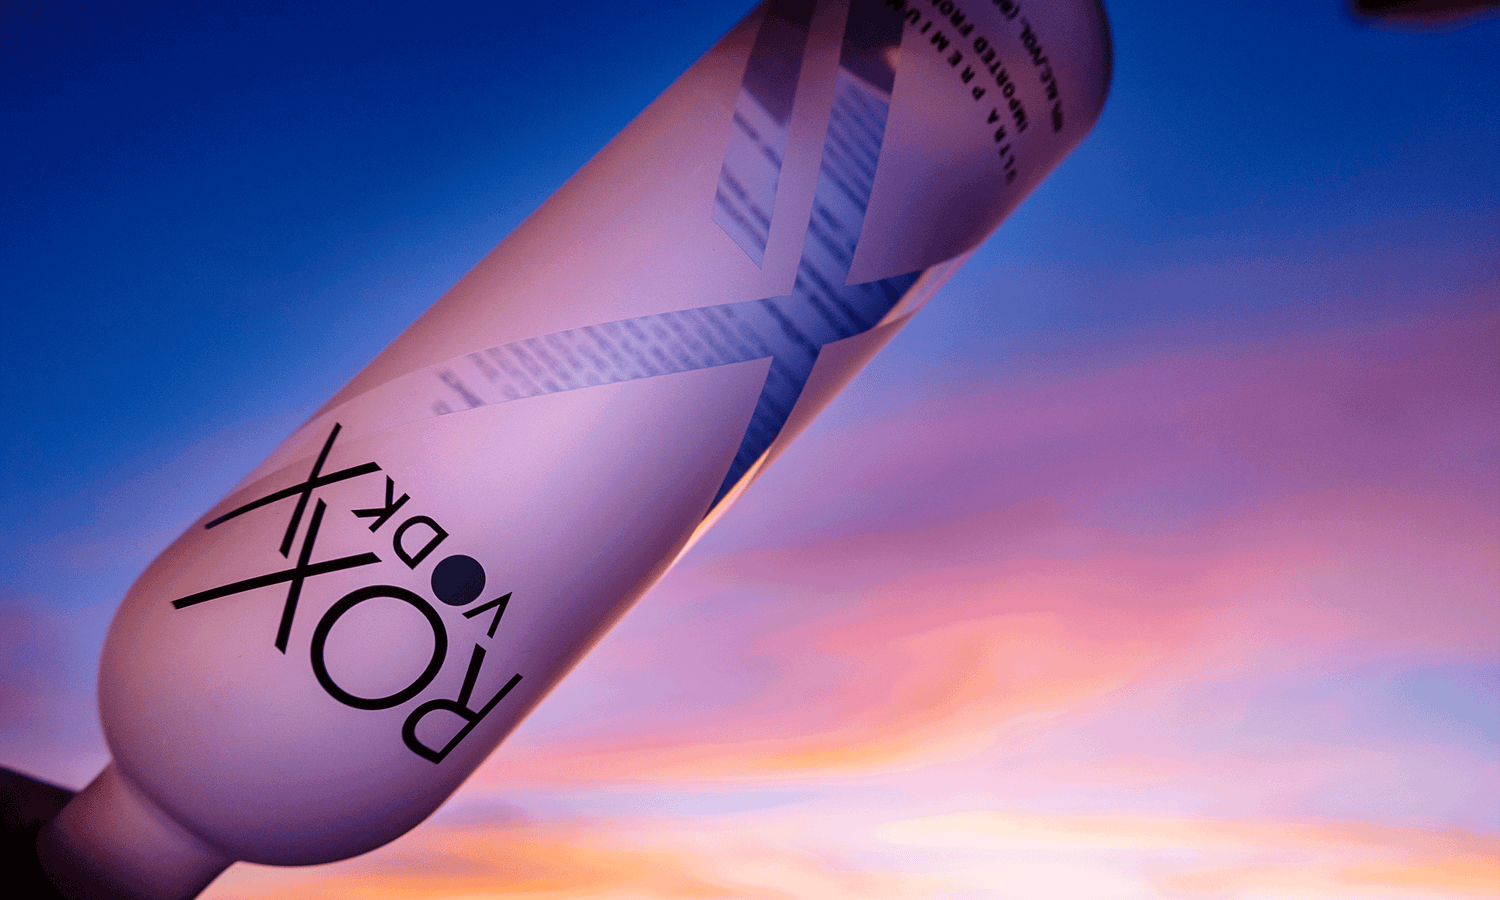 Image of ROXX Vodka with a sunset sky behind the bottle.